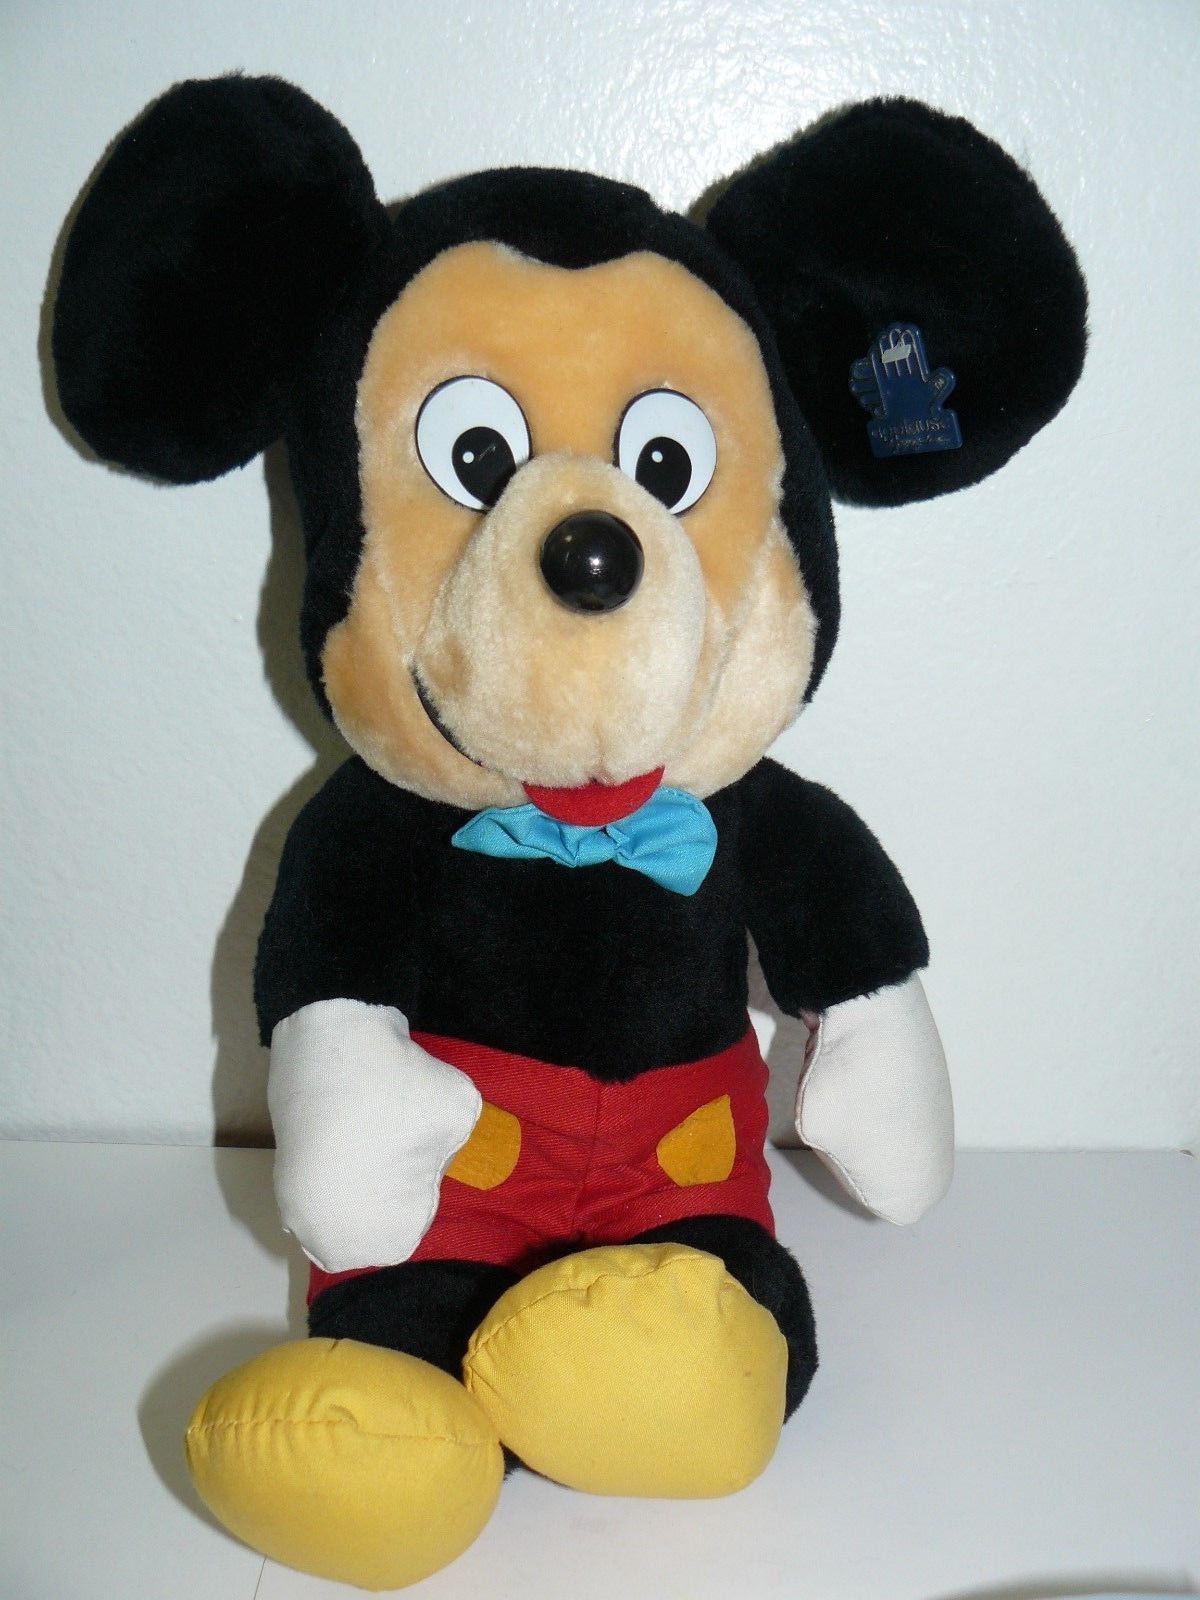 Applause Mickey Mouse Plush Toy 14" - $14.11